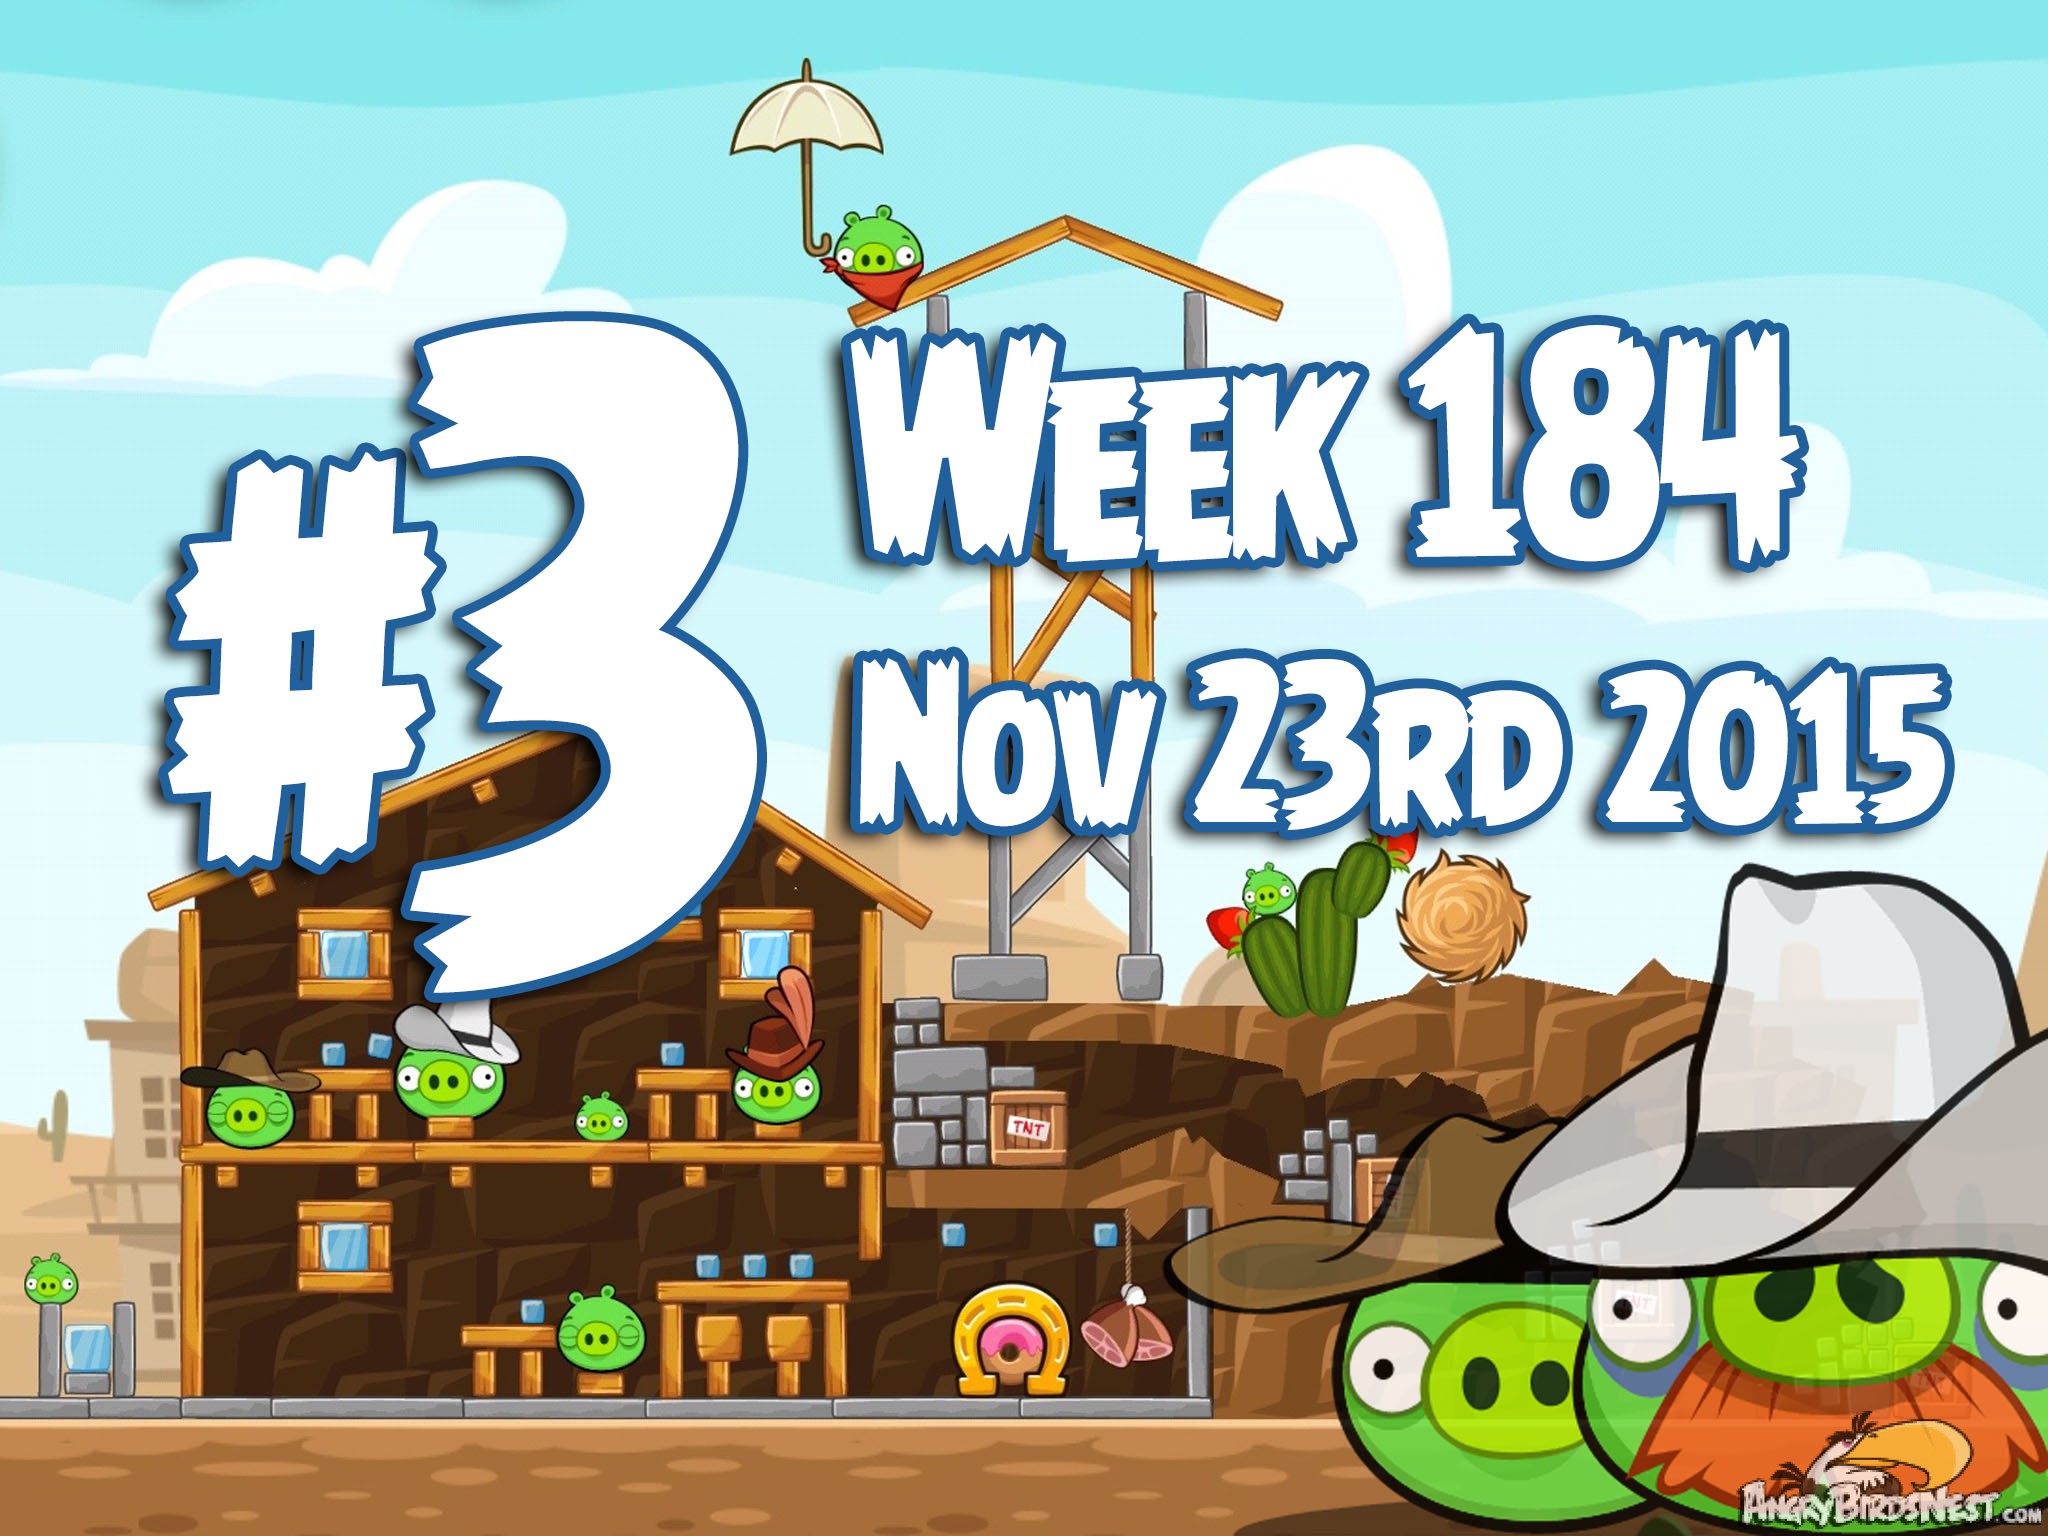 angry birds with friends weekly tournament